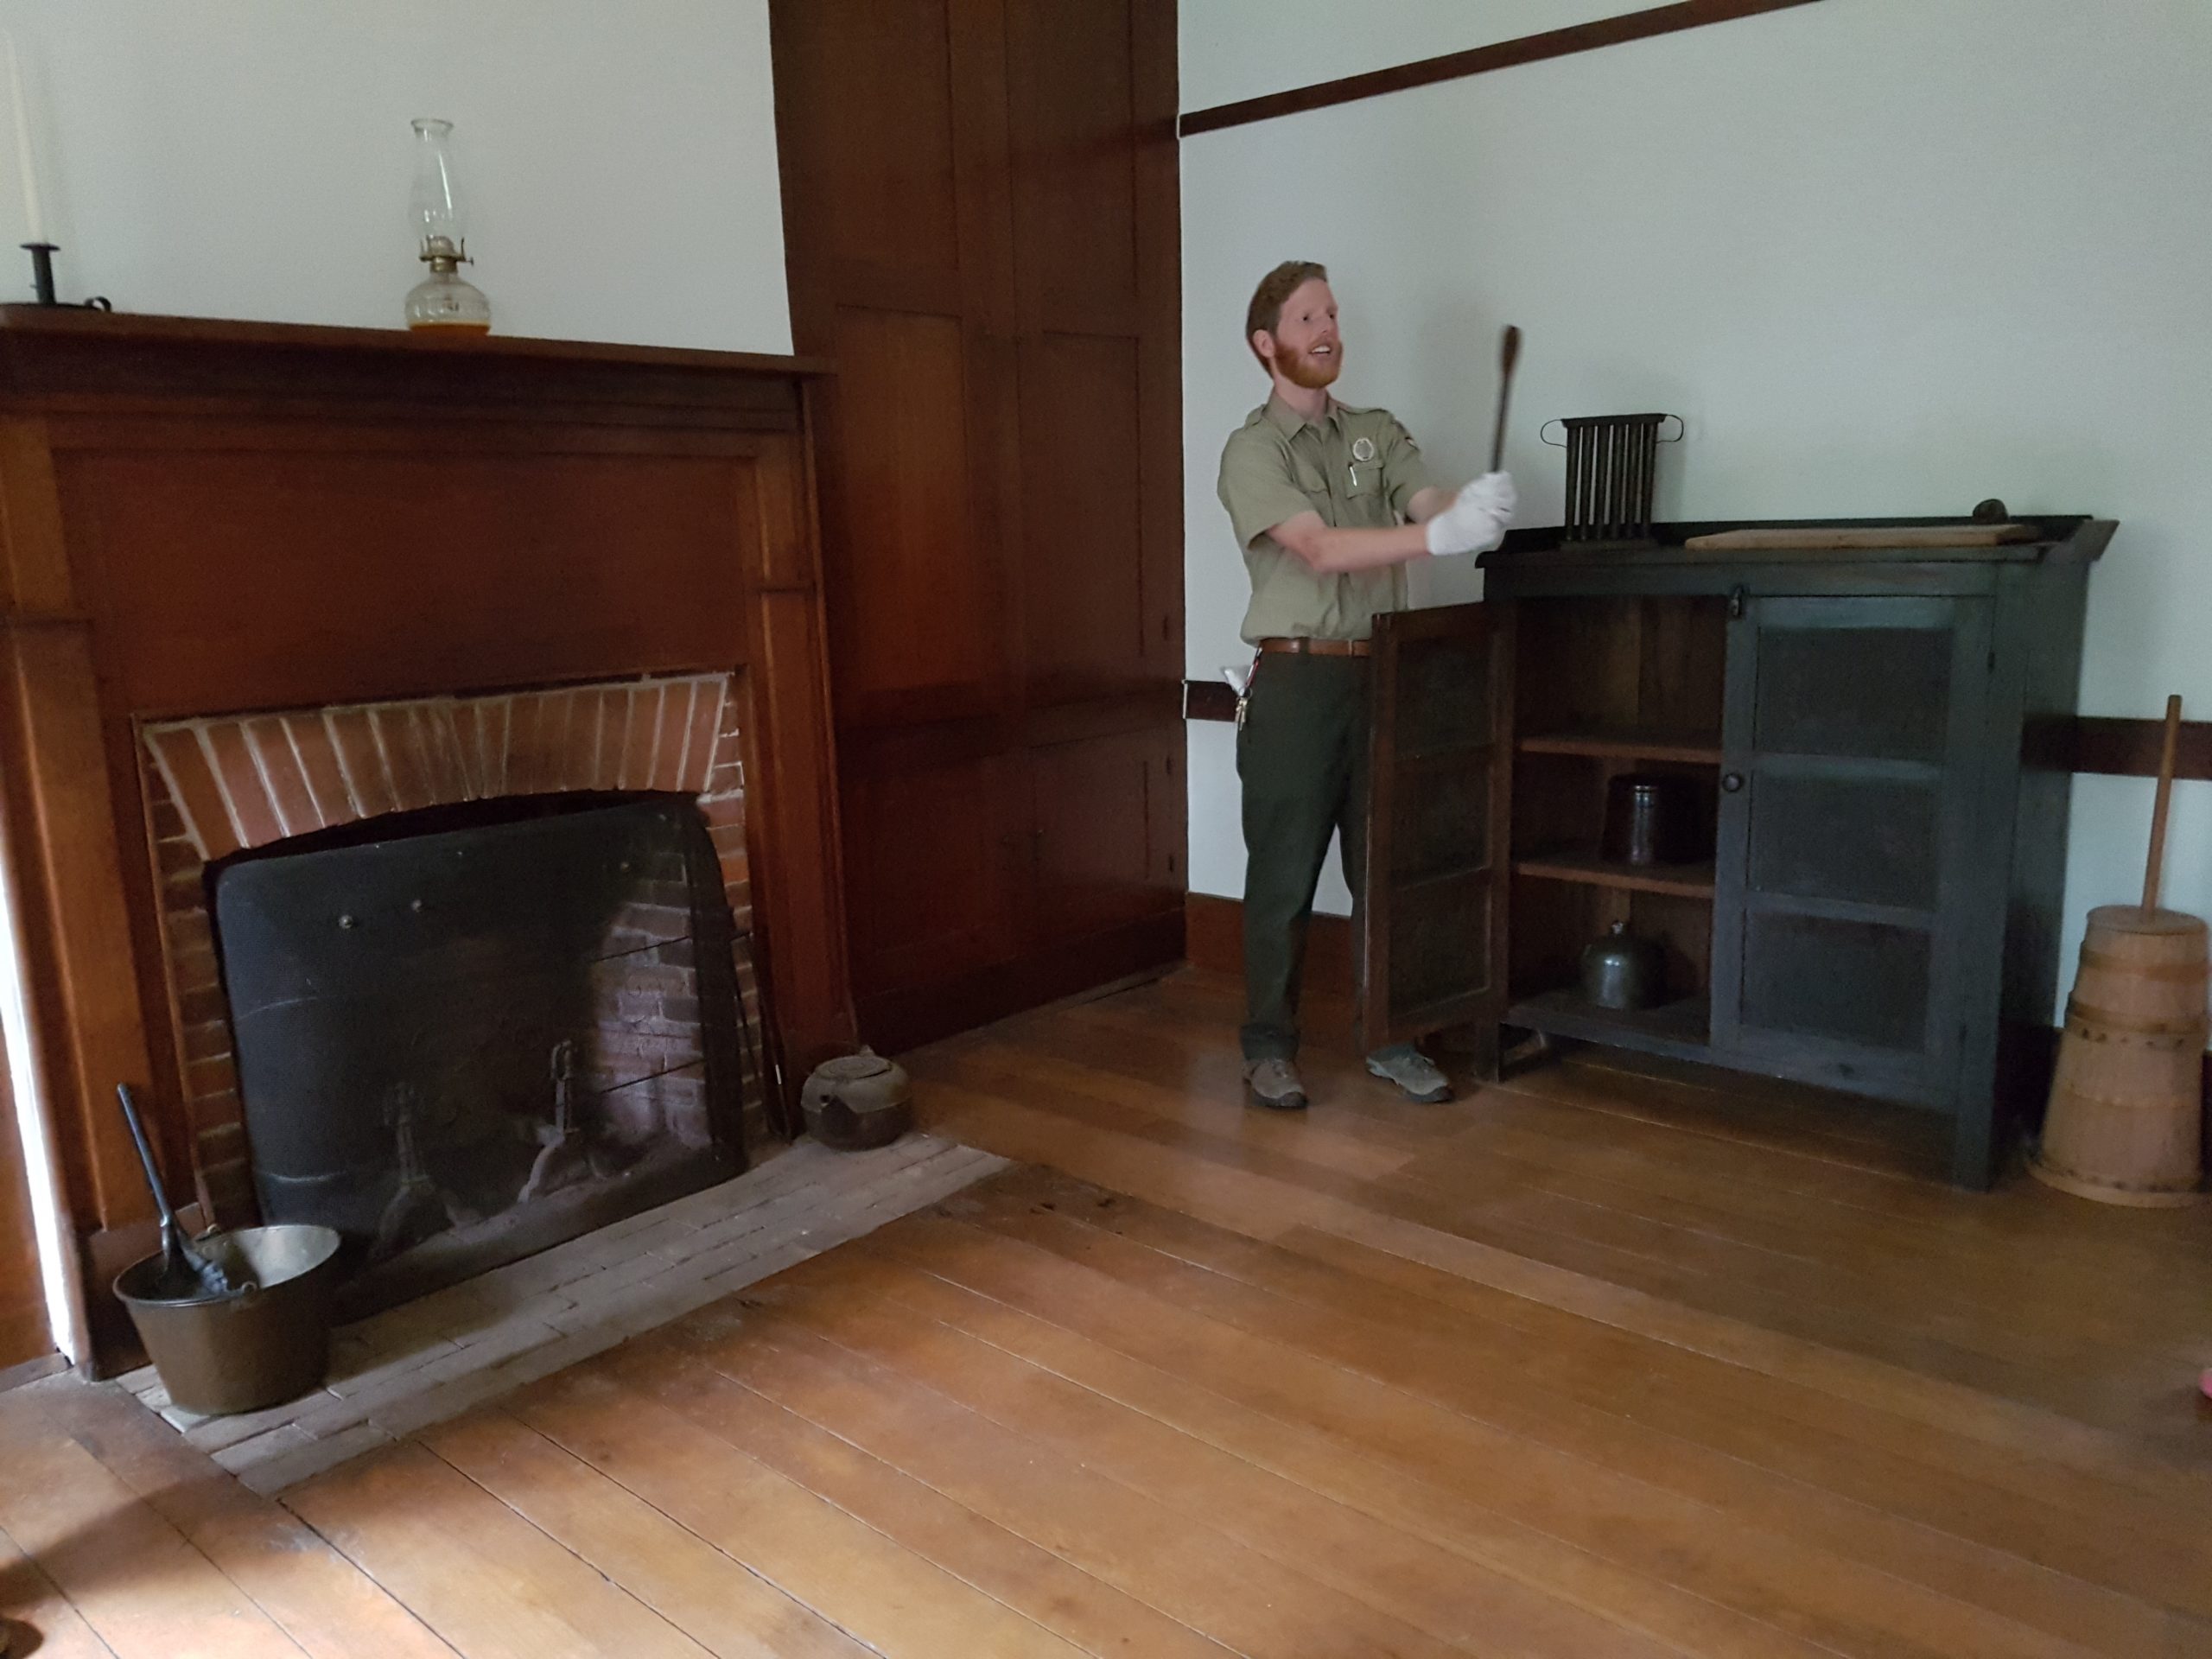 Lusk Home guided tour at Turkey Run State Park